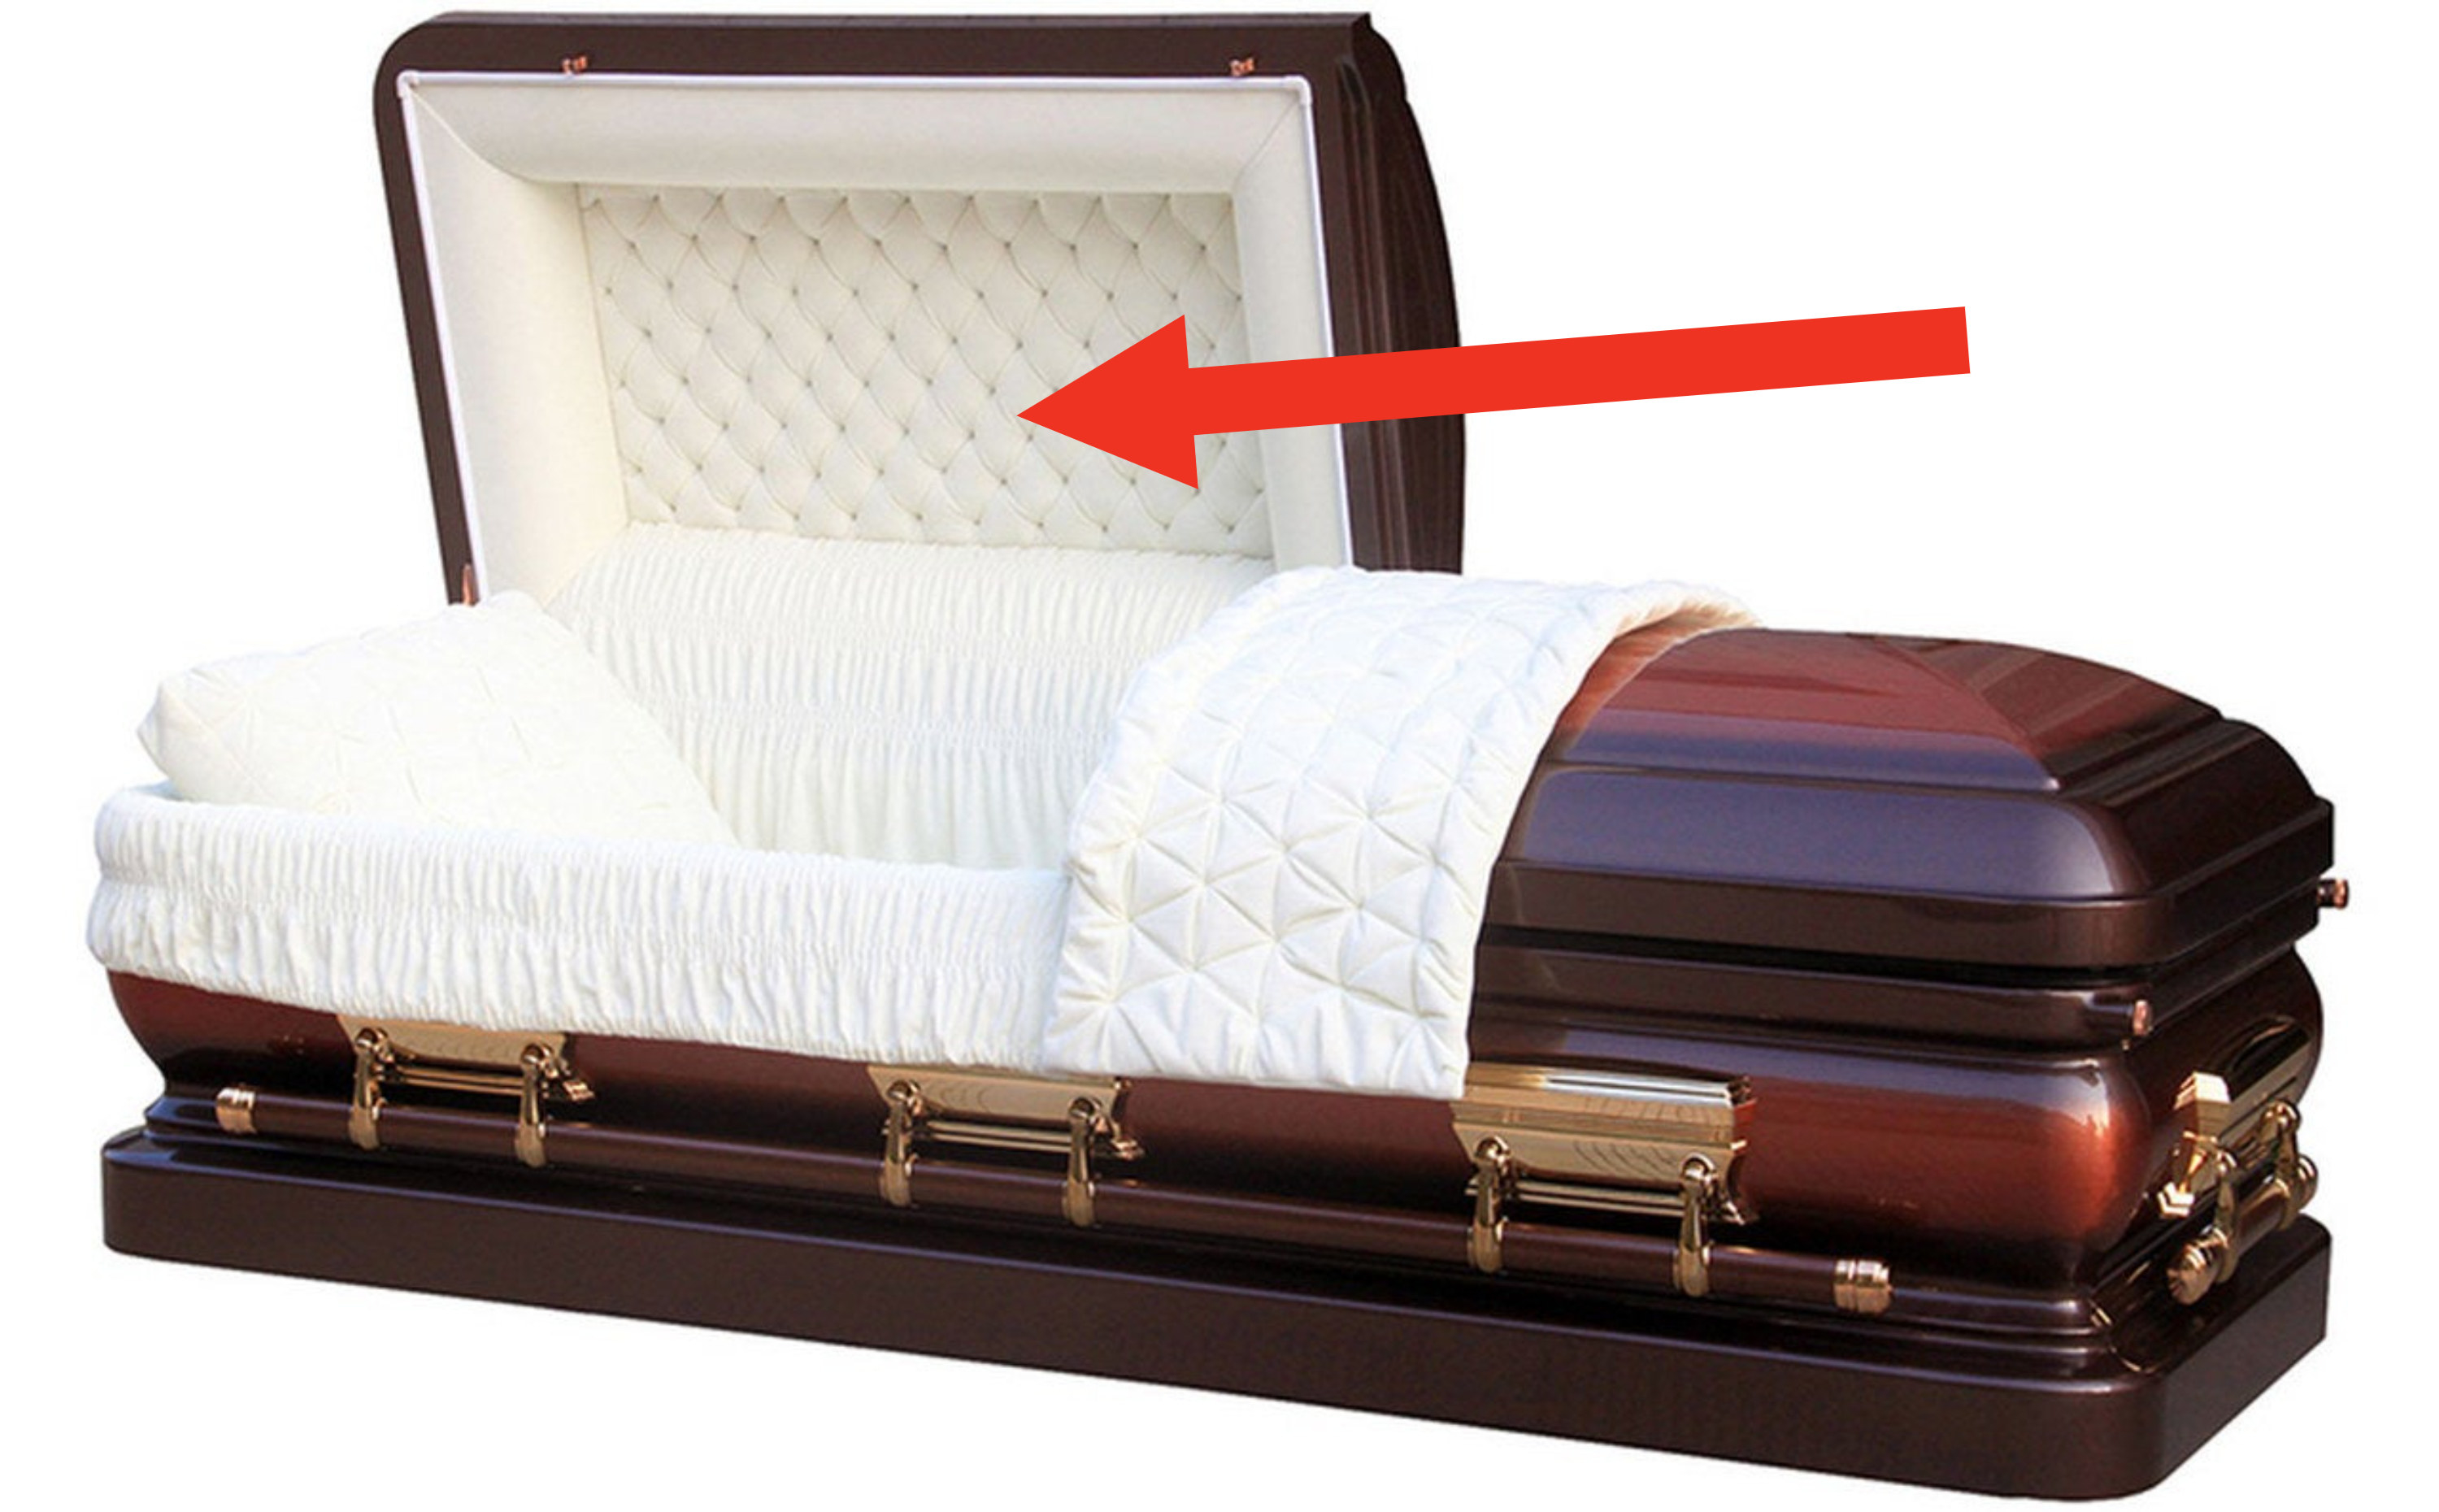 Large casket with white tufted interior